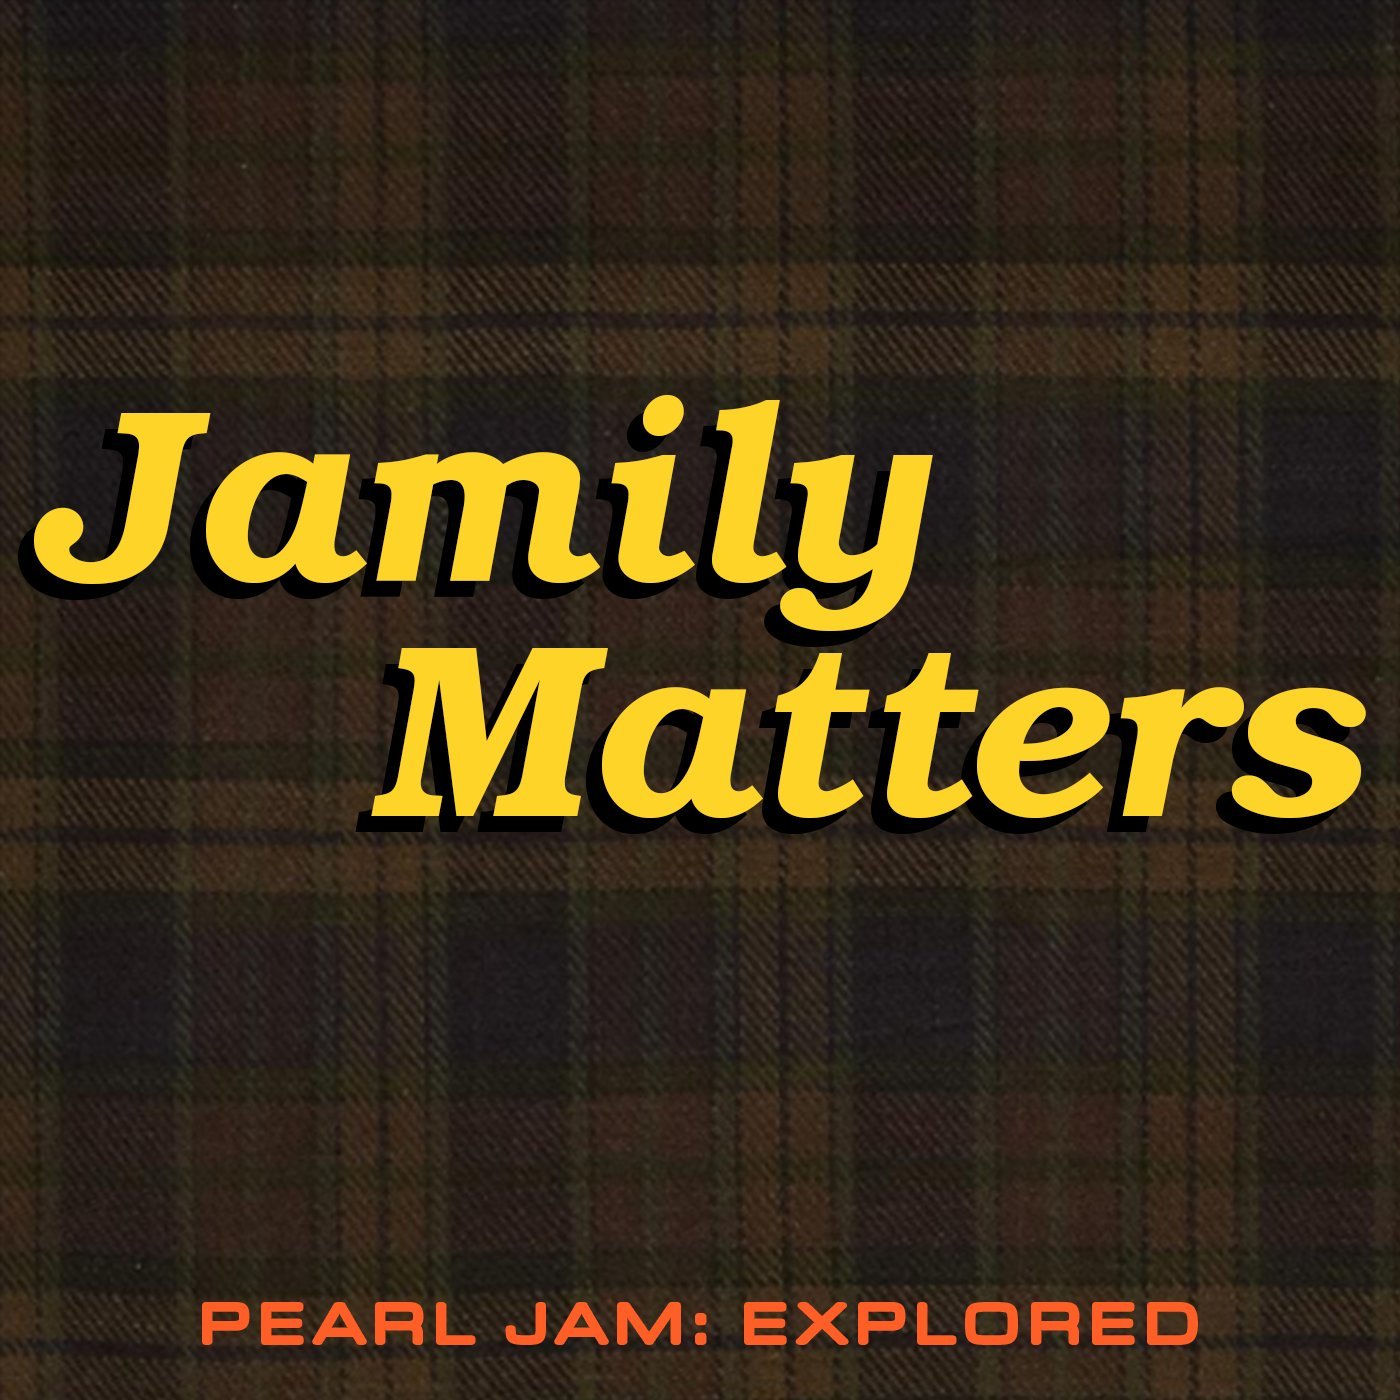 A podcast about Pearl Jam